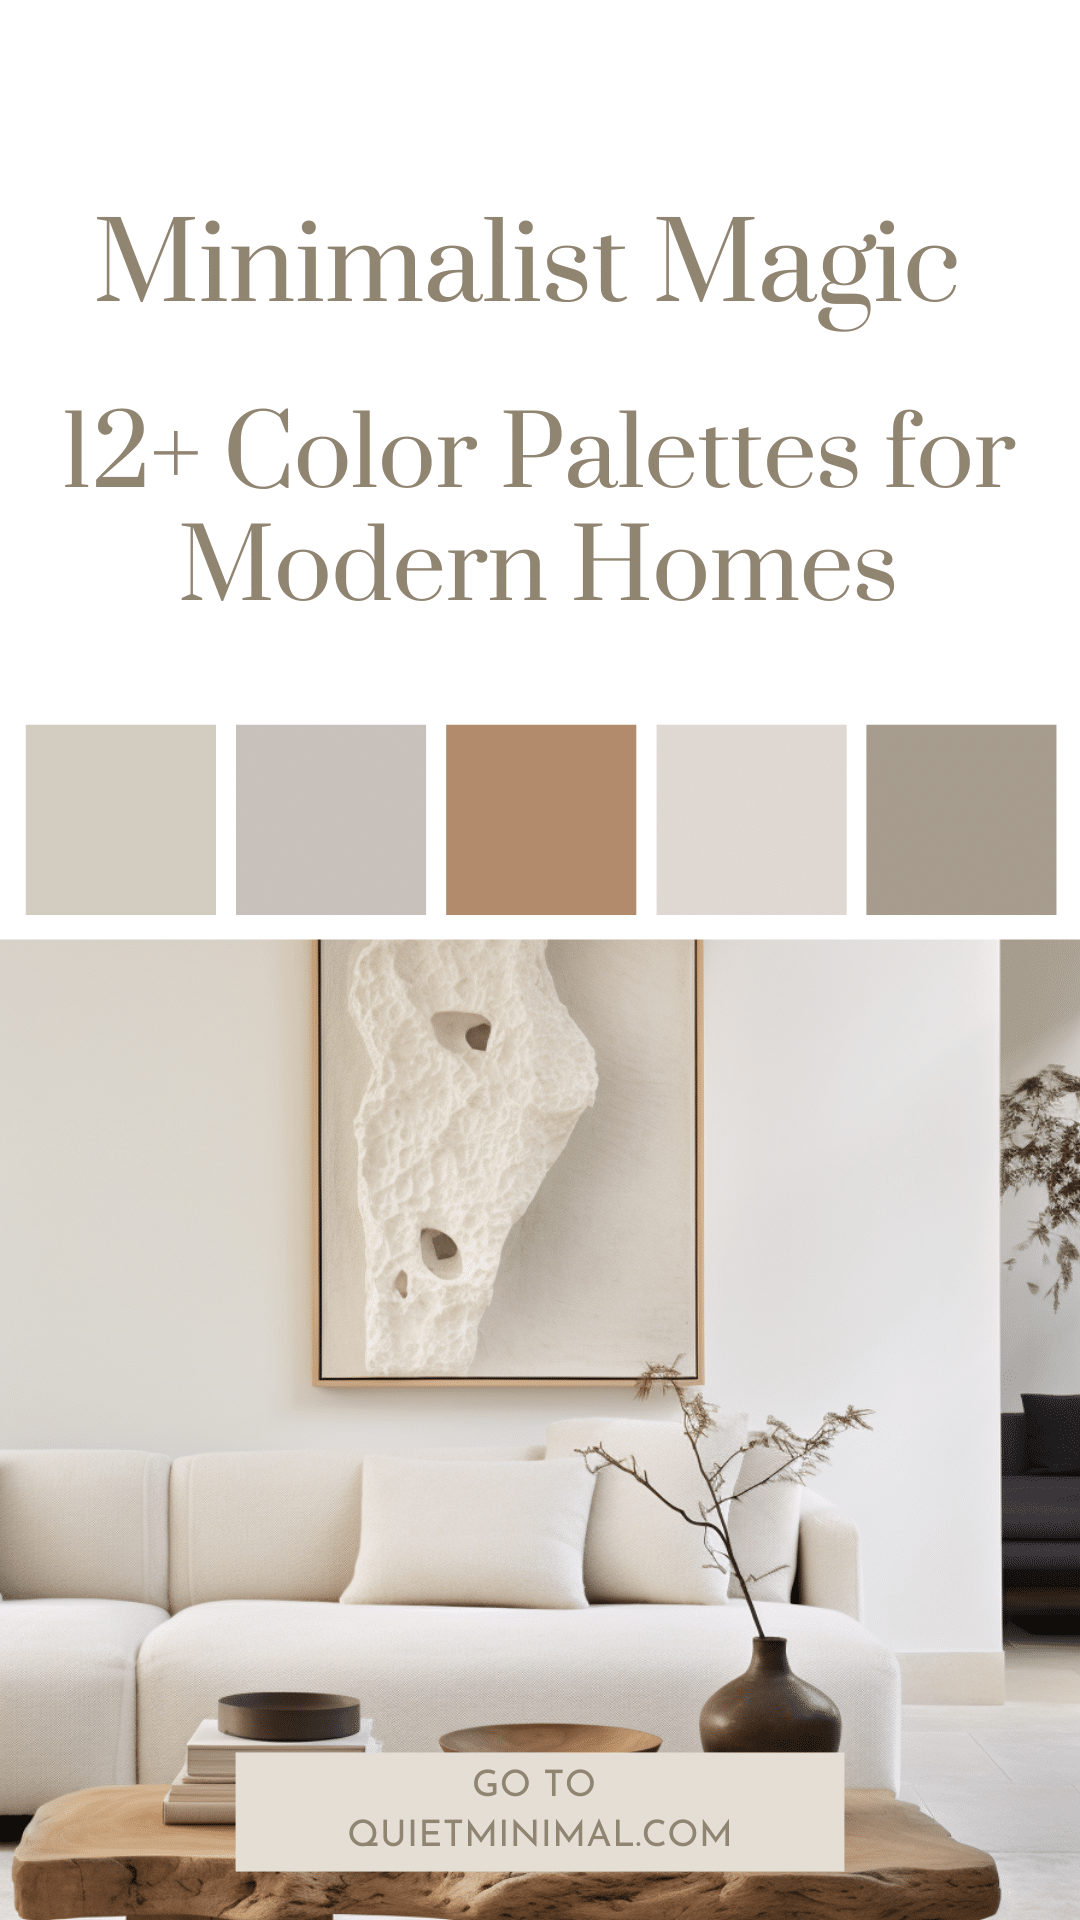 Minimalist magic 12 color palettes for modern homes.